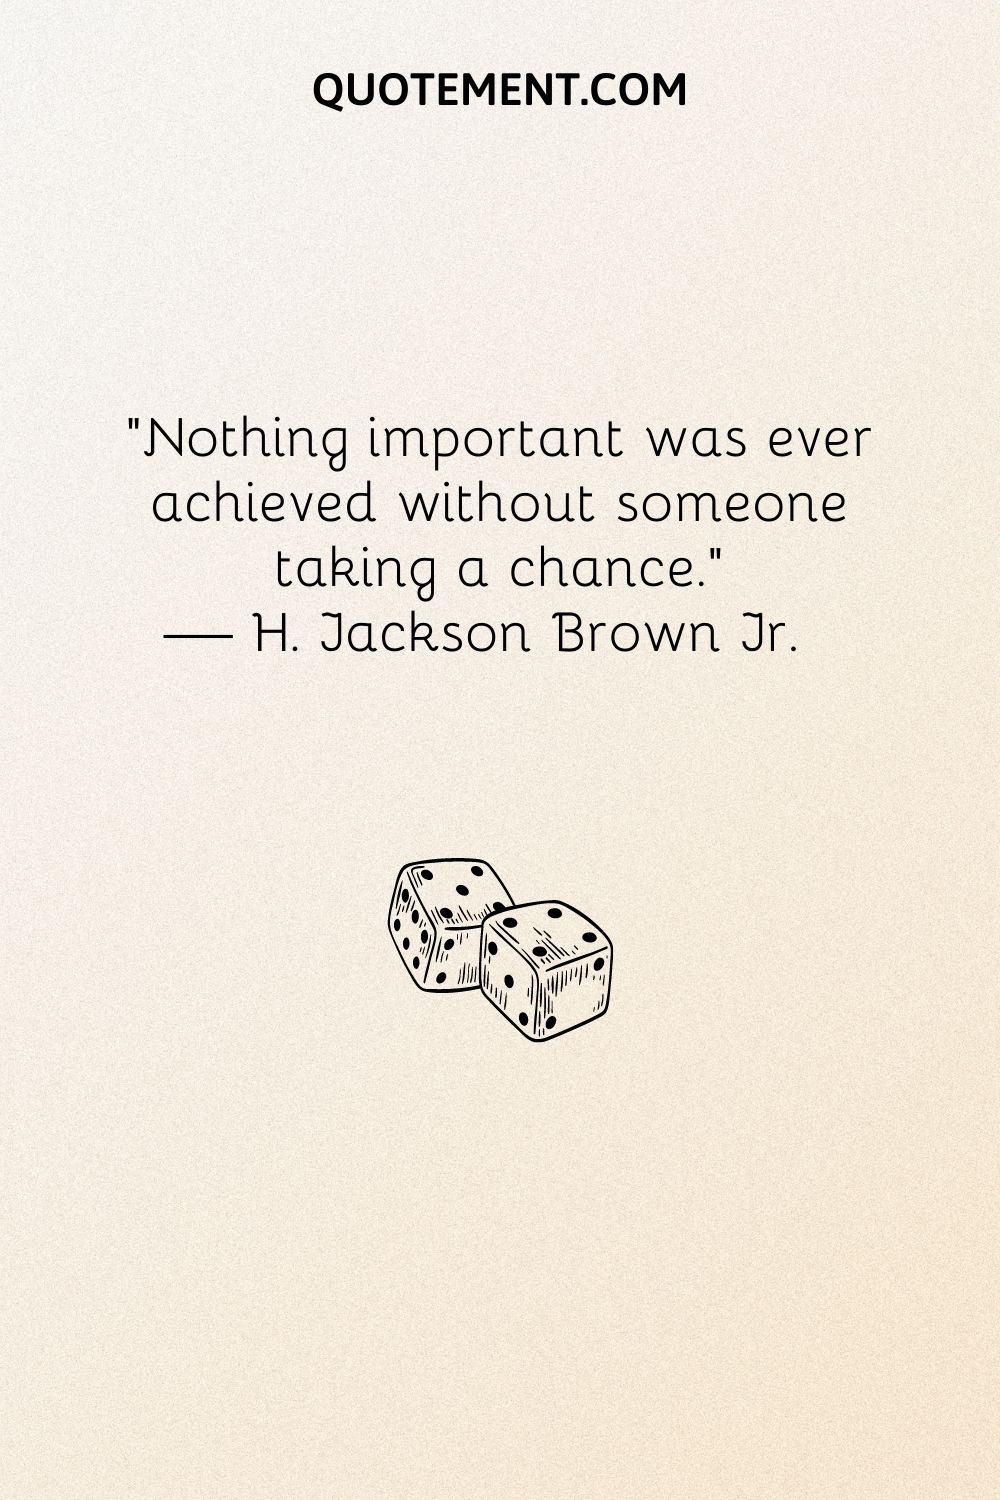 Nothing important was ever achieved without someone taking a chance